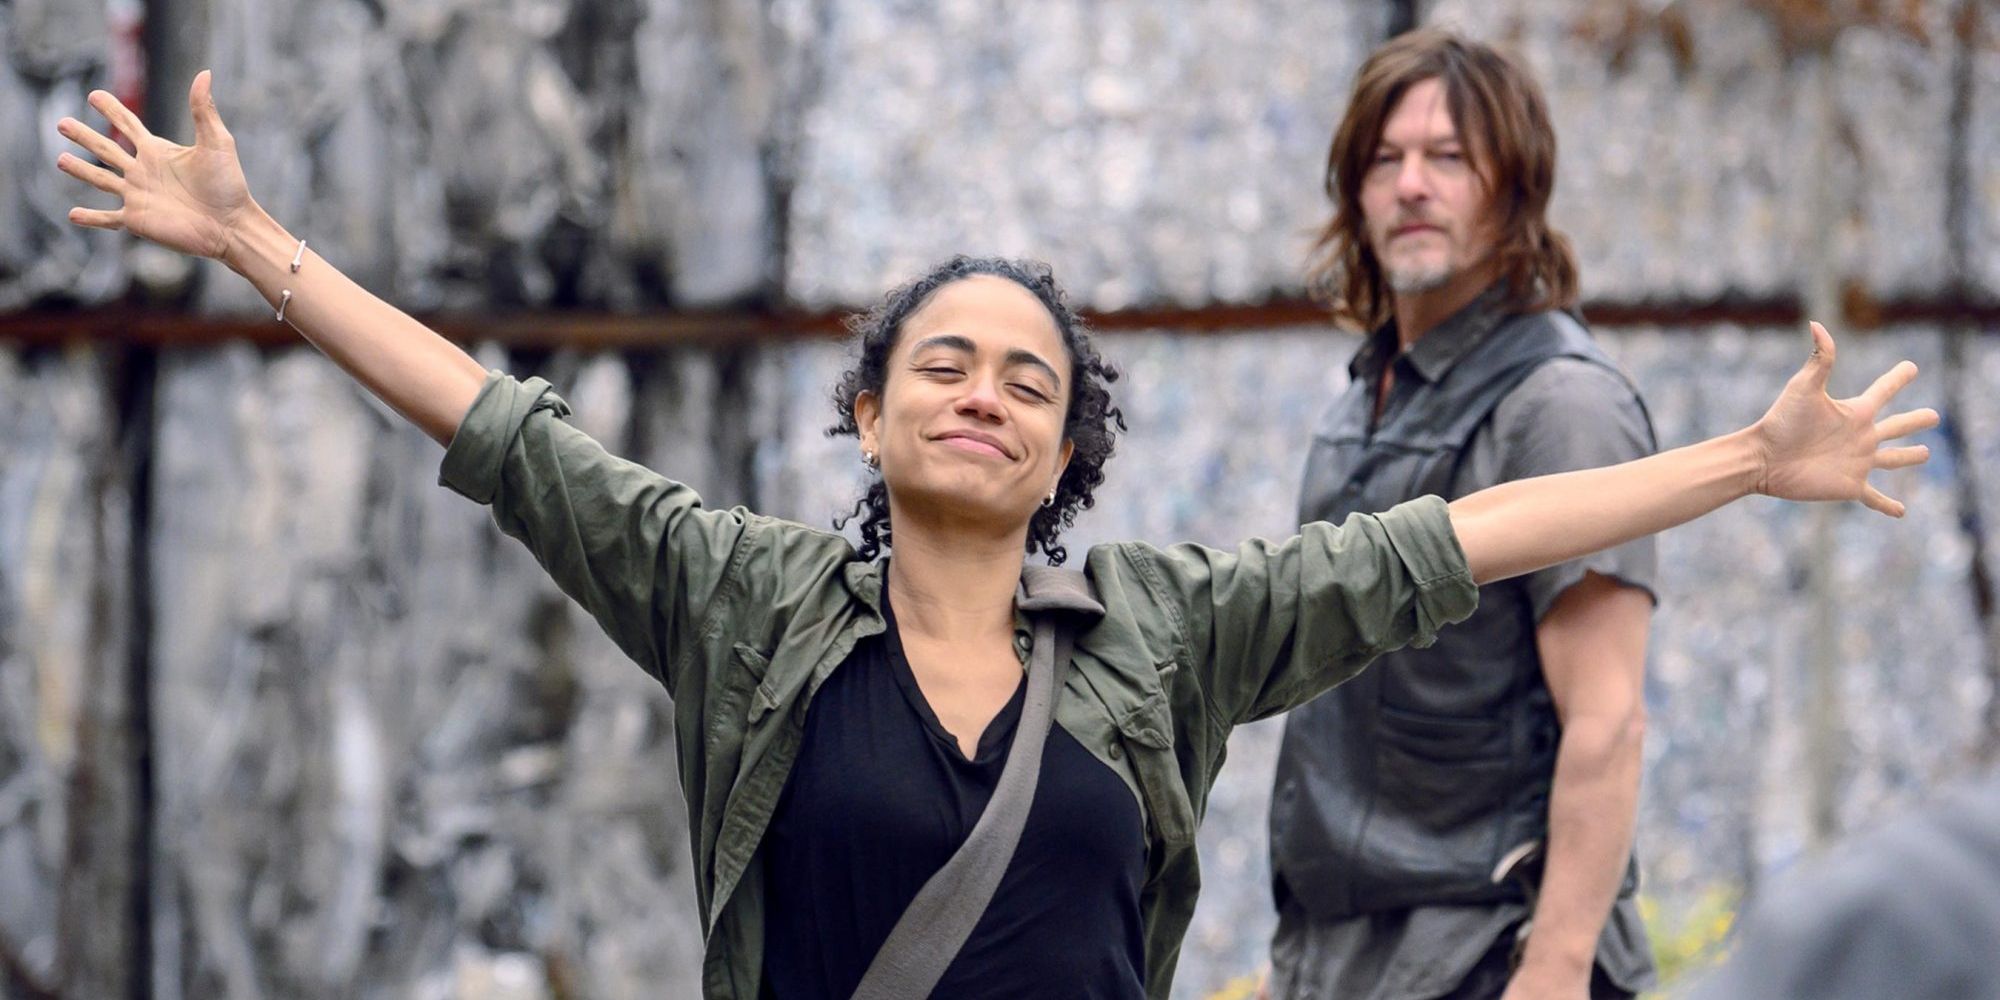 Connie (Lauren Ridloff) spreads her arms out goodnaturedly, Daryl (Norman Reedus) watches from behind in The Walking Dead